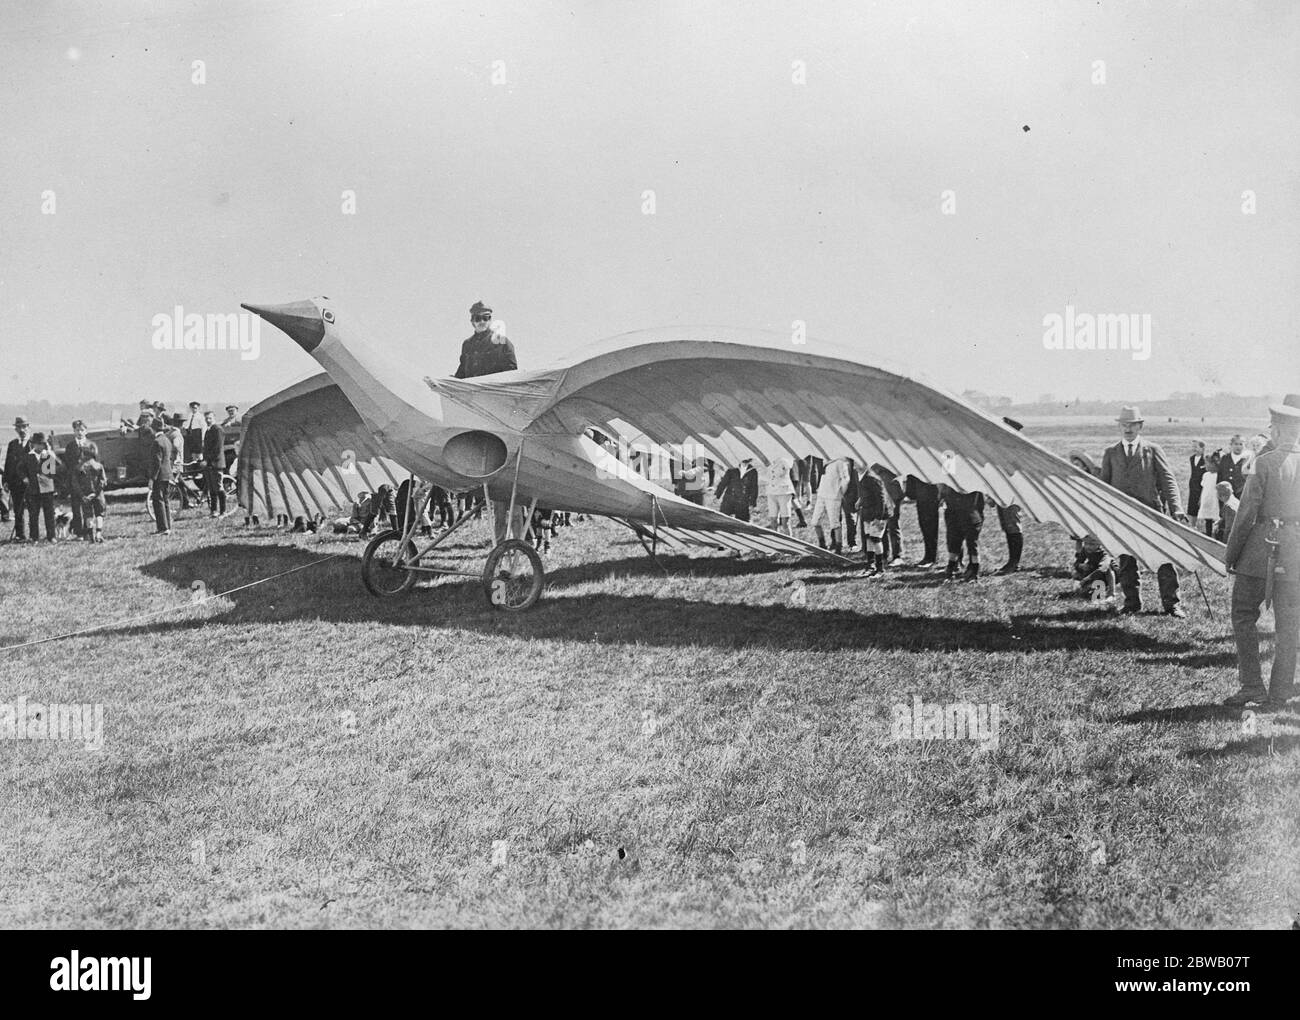 Accident during glider trials at Berlin A series of glider trials have just taken place on the Tempelhofer field at Berlin The photograph shows the glider apparatus of the Schwerdt construction firm which is made in the form of a bird 24 May 1922 Stock Photo